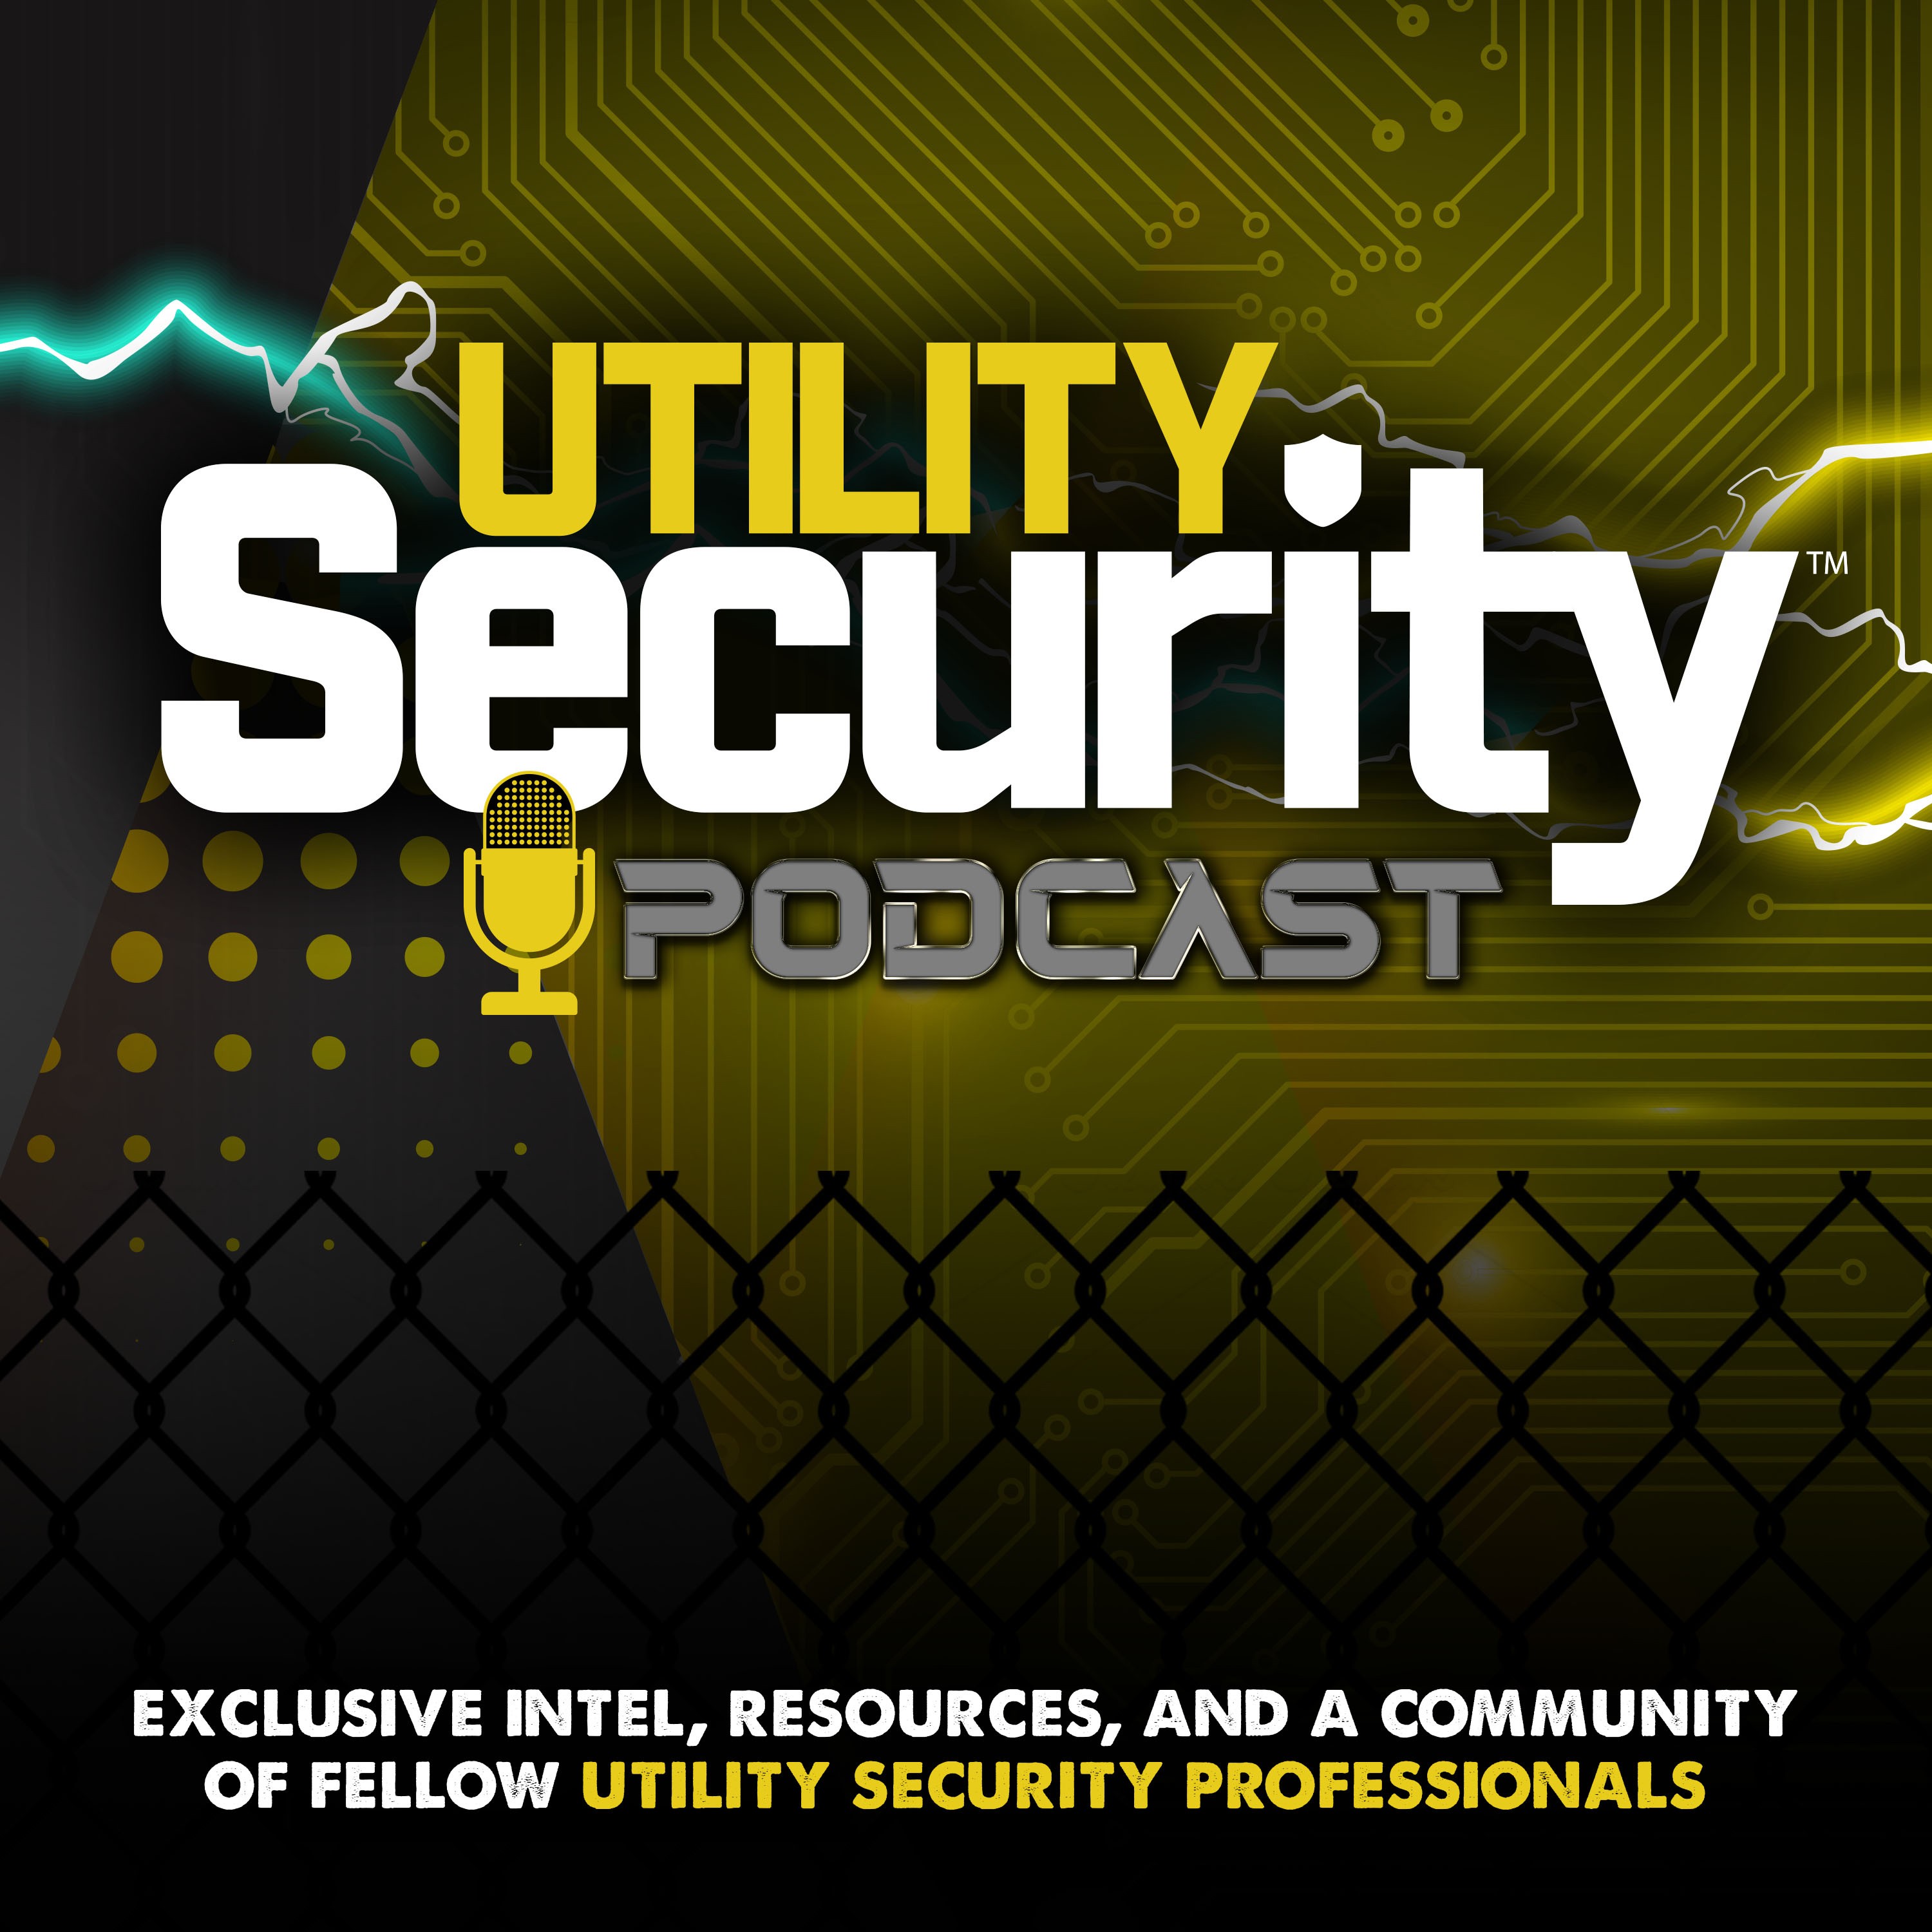 Utility Security Podcast